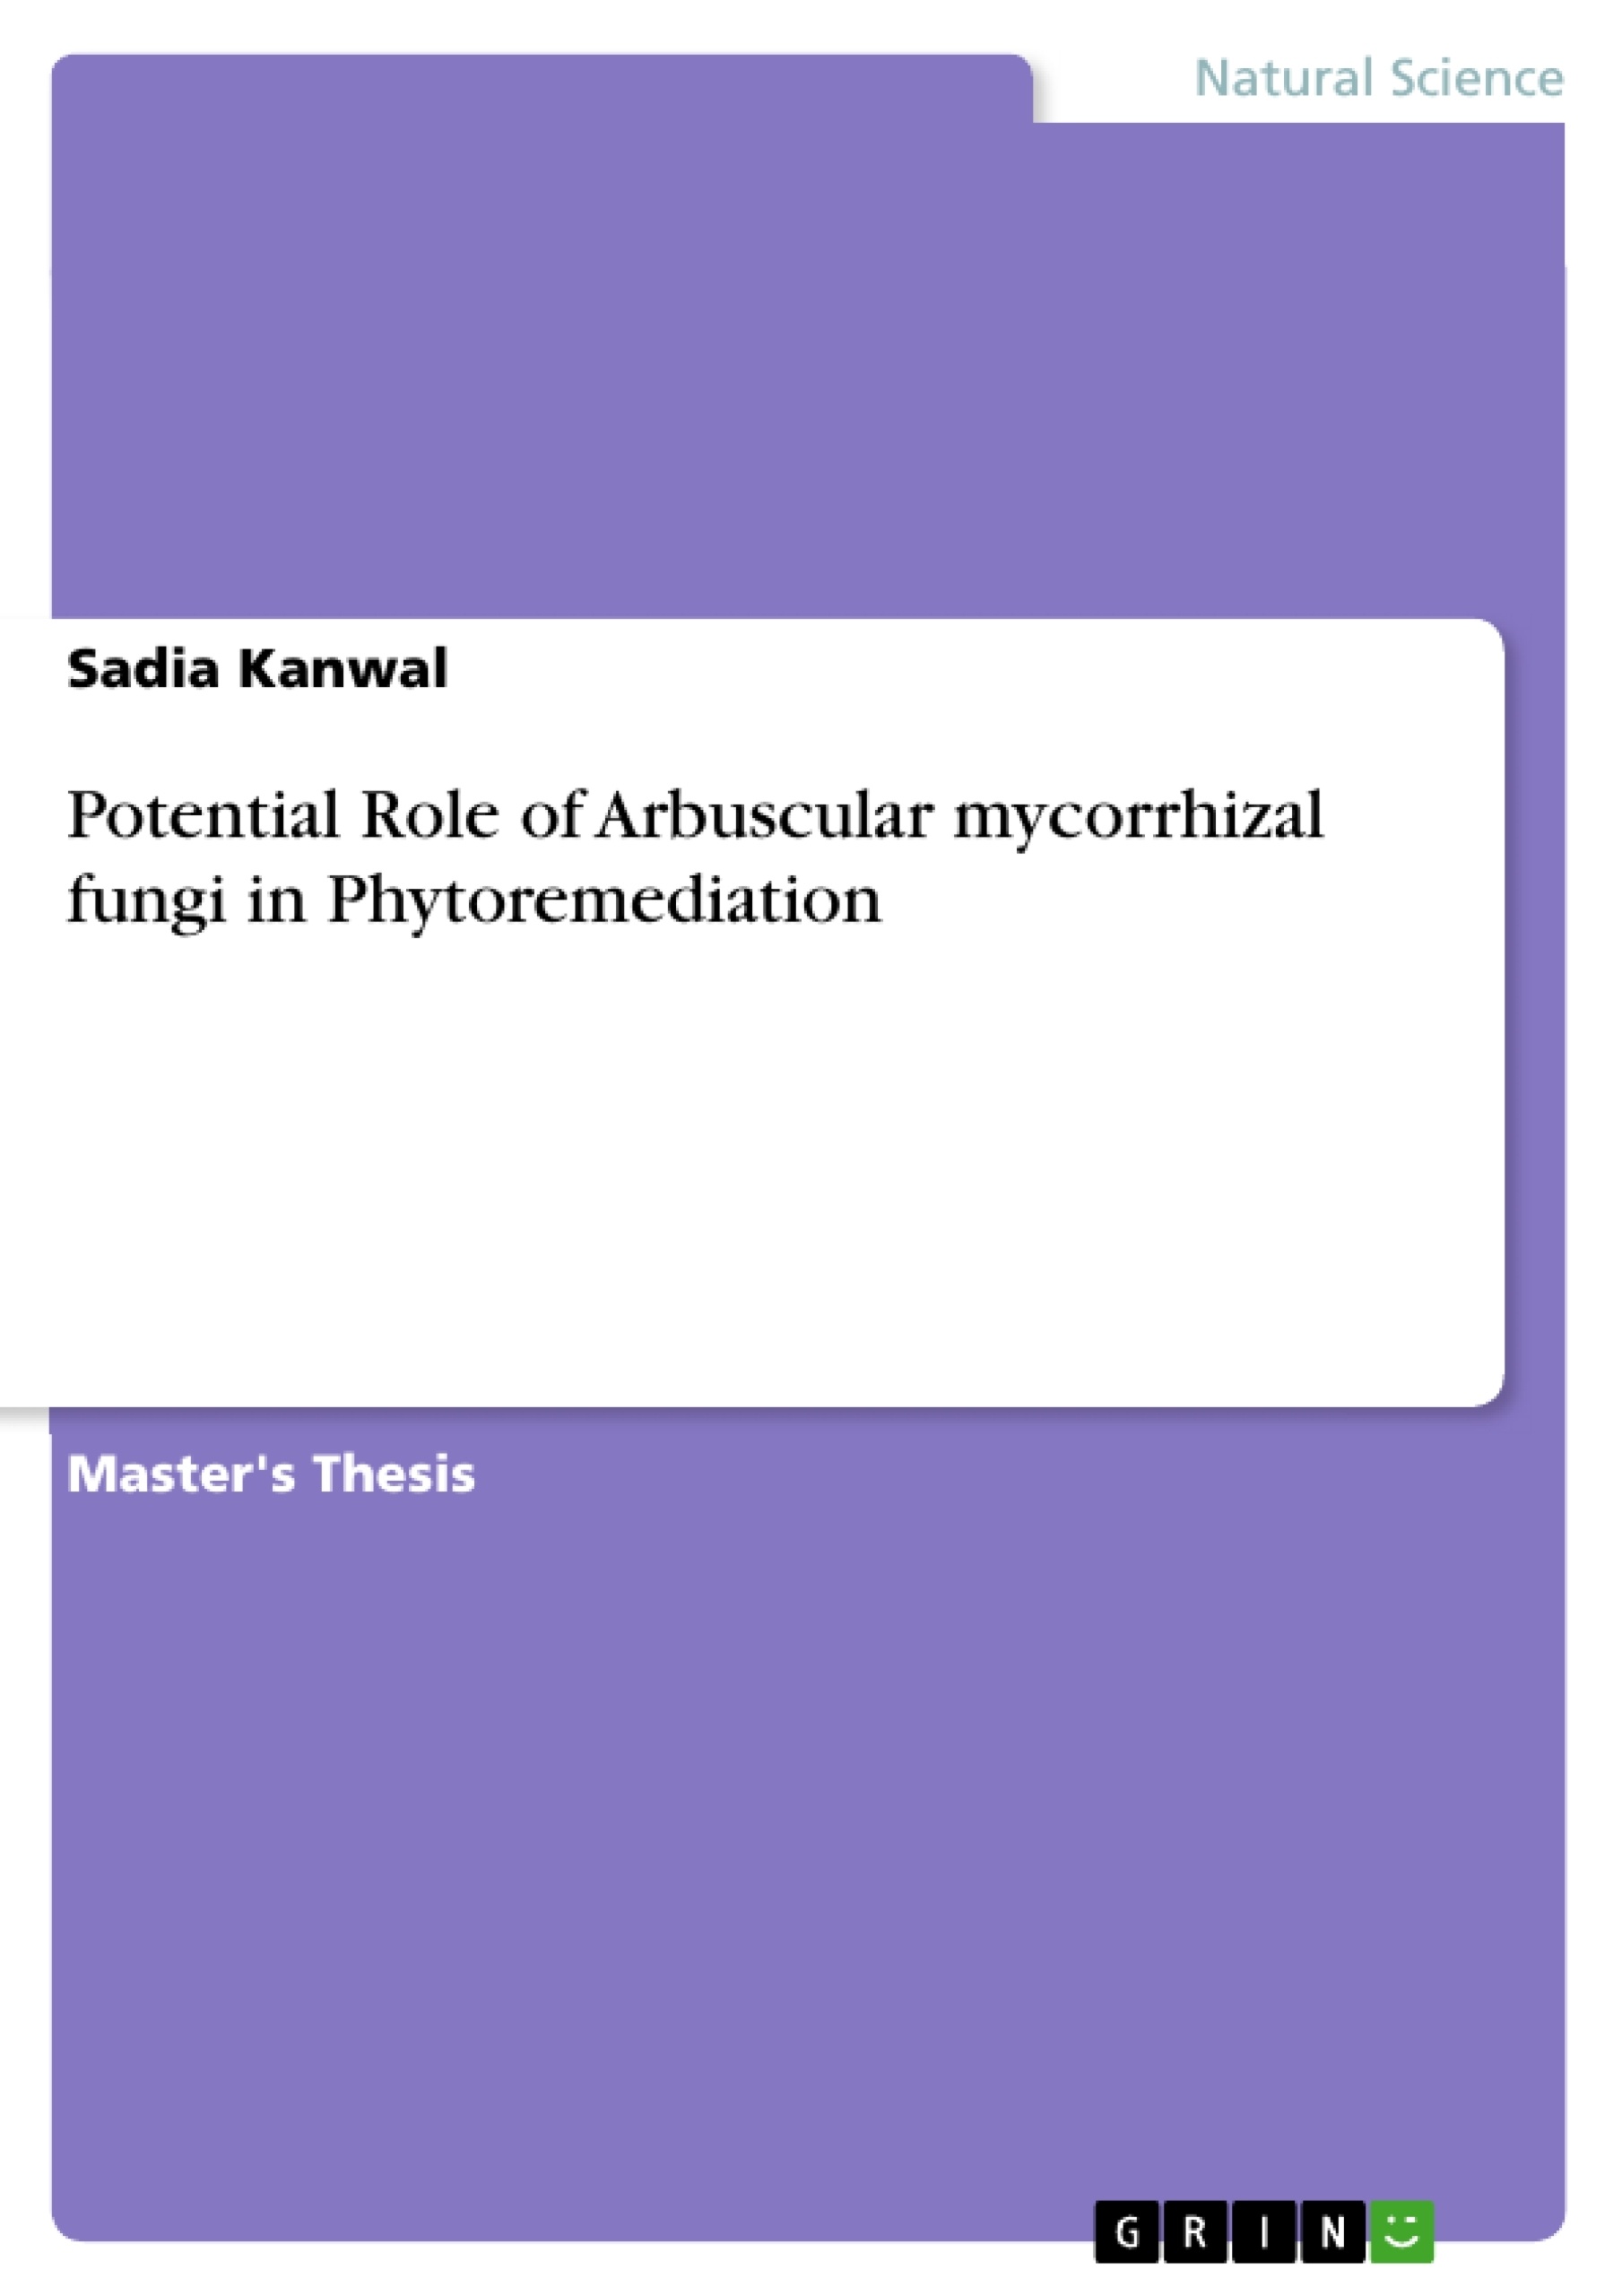 Title: Potential Role of Arbuscular mycorrhizal fungi in Phytoremediation